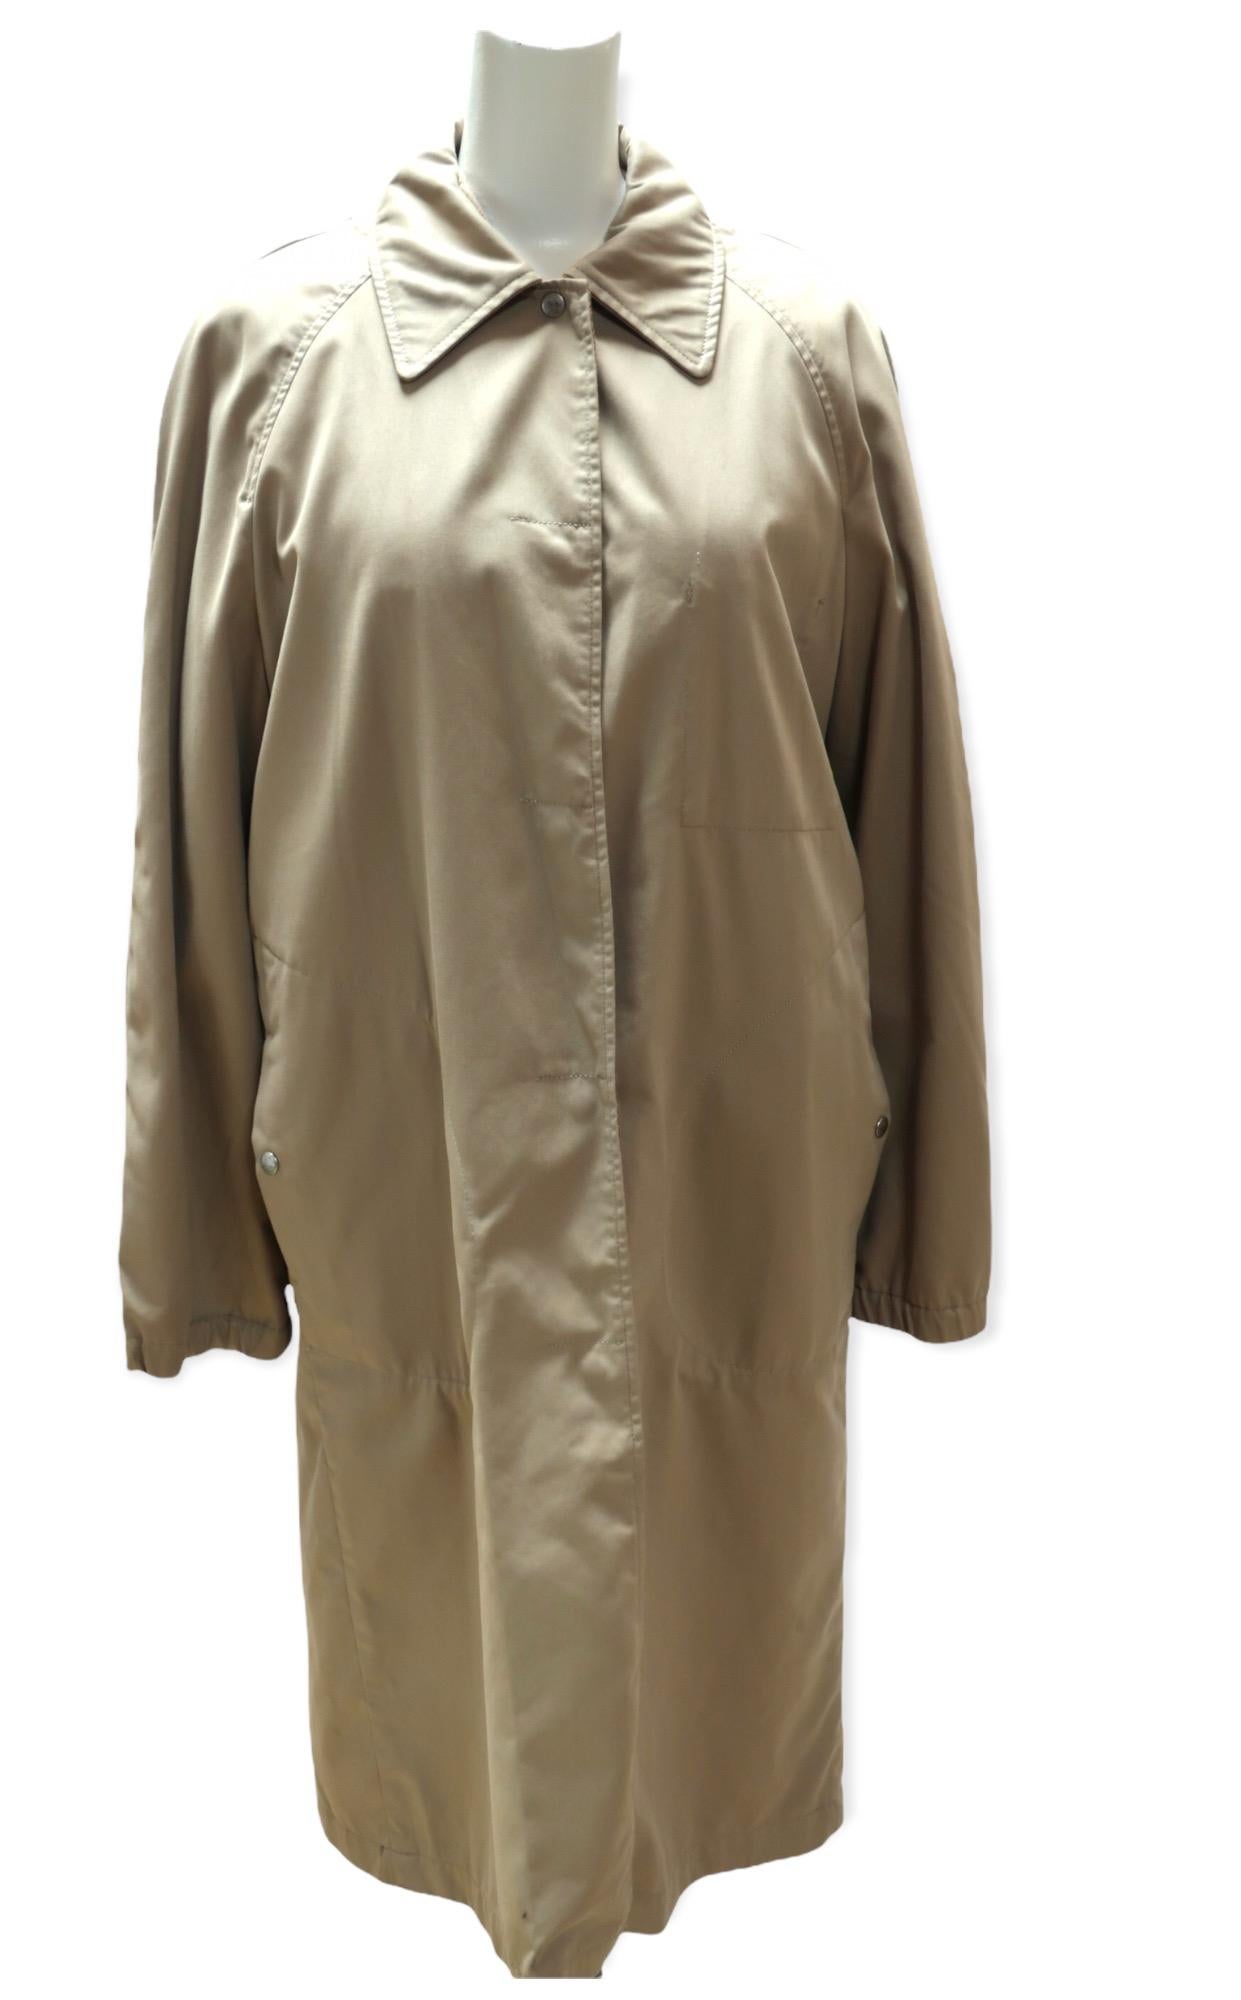 This long coat comes from Maison Martin Margiela. The inner detachable layer is soft and light and feels like you're wearing a blanket. It has a long zippered front. The outer trench style layer will insulate you from chilly weather. It has a snap